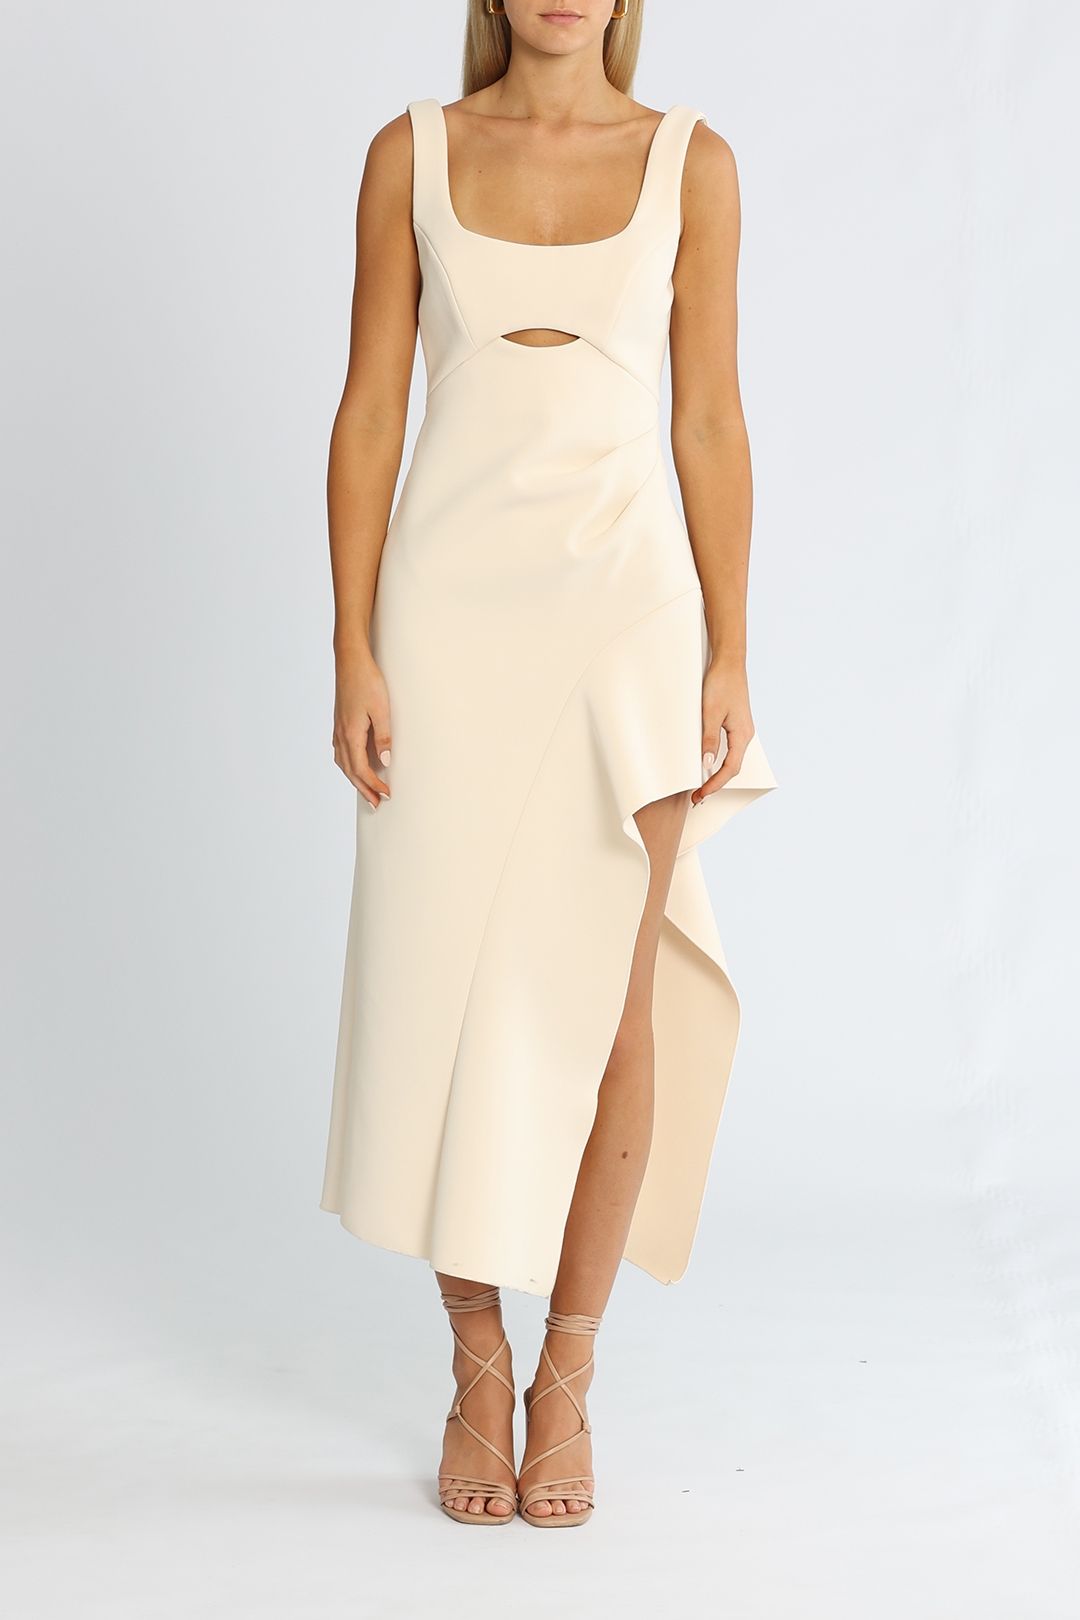 Acler Devin Dress